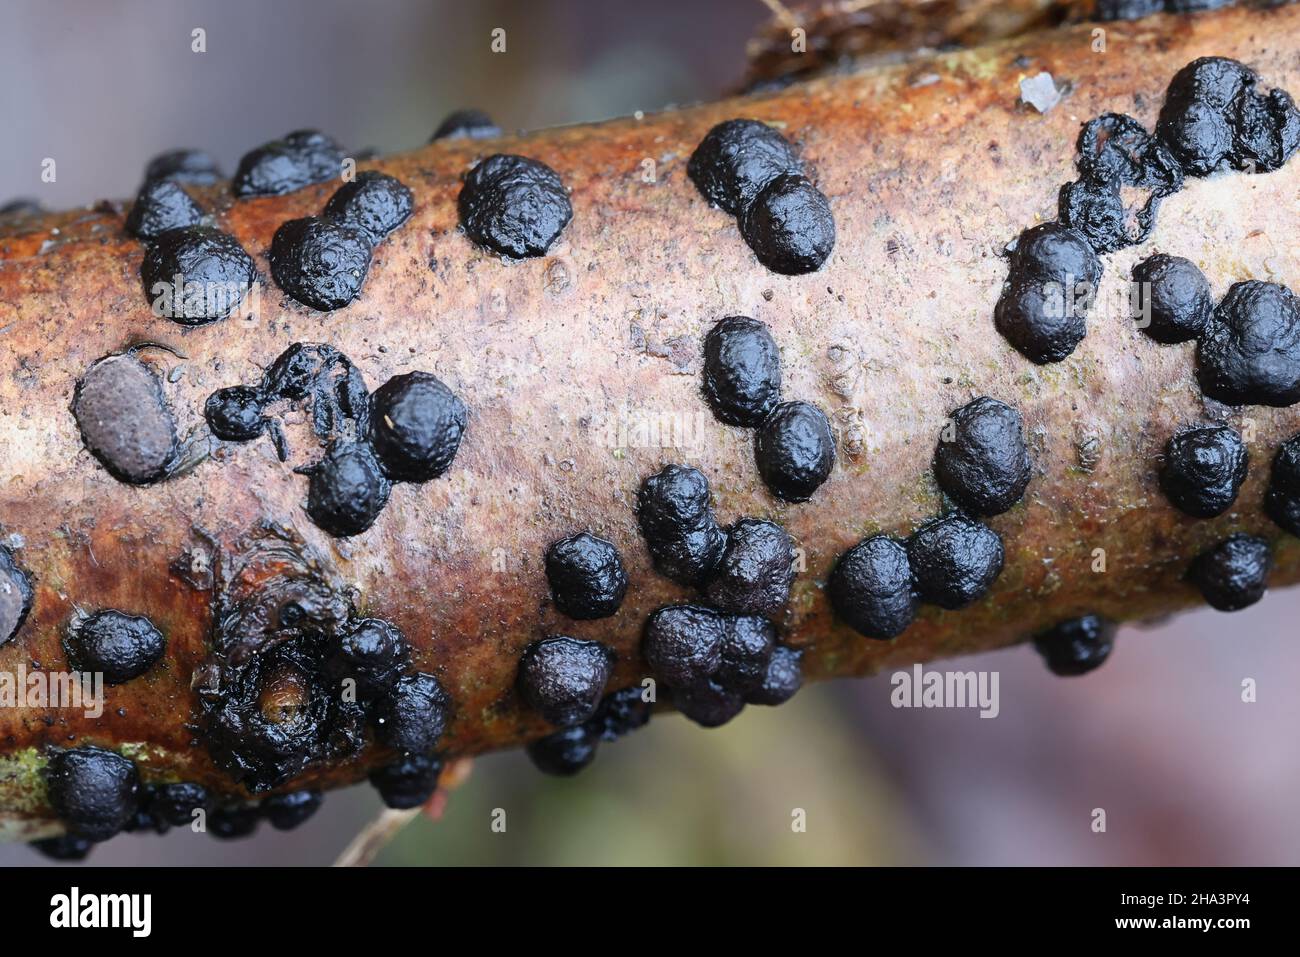 Diatrype bullata, also called Hypoxylon bullatum, commonly known as Willow Barkspot, wild fungus from Finland Stock Photo